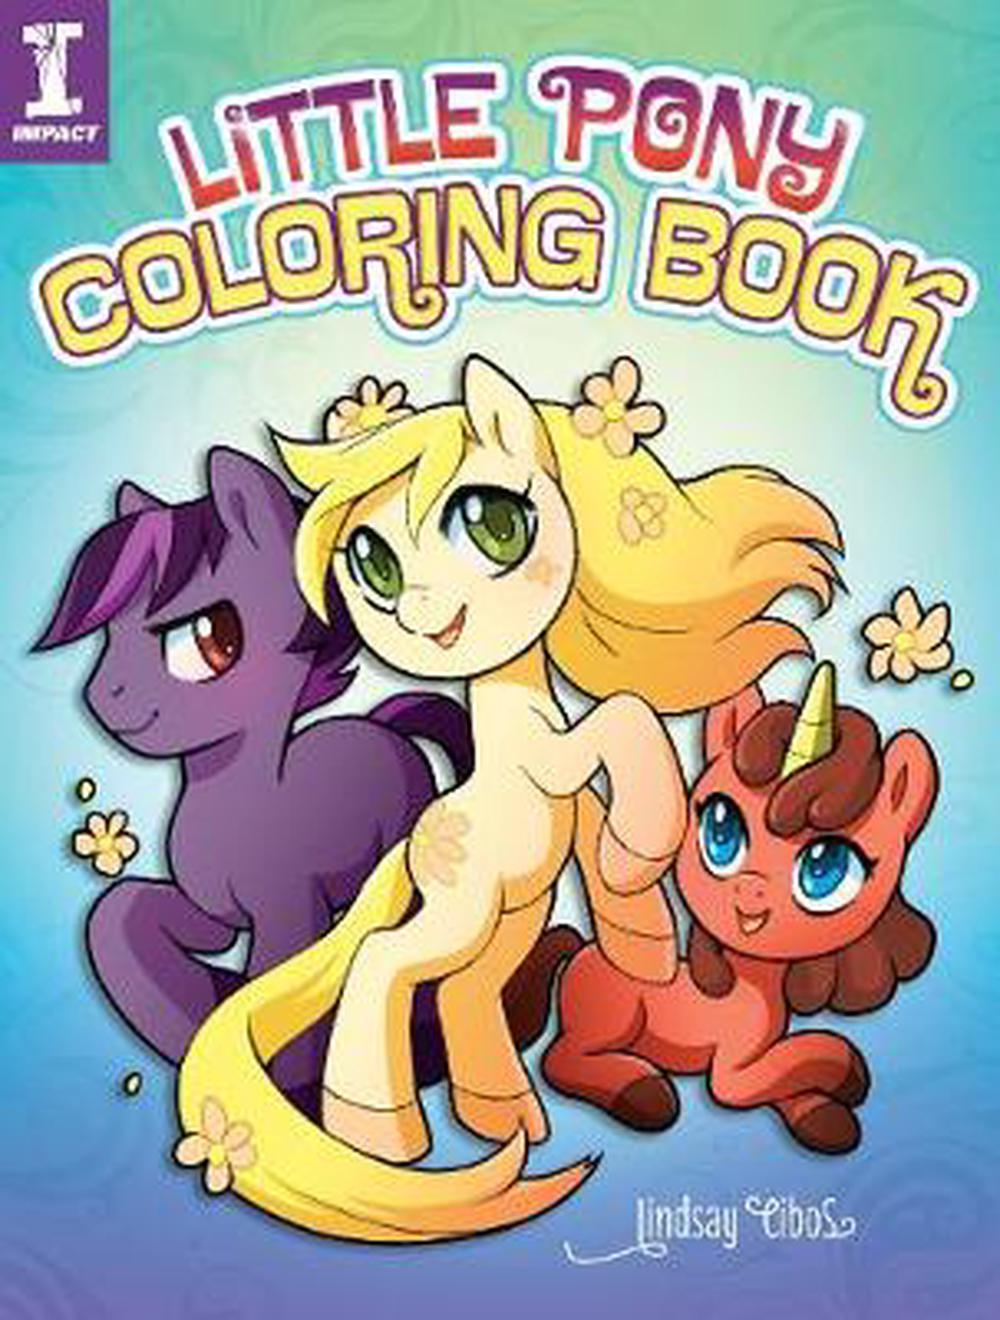 little pony drawing book lindsay cibos